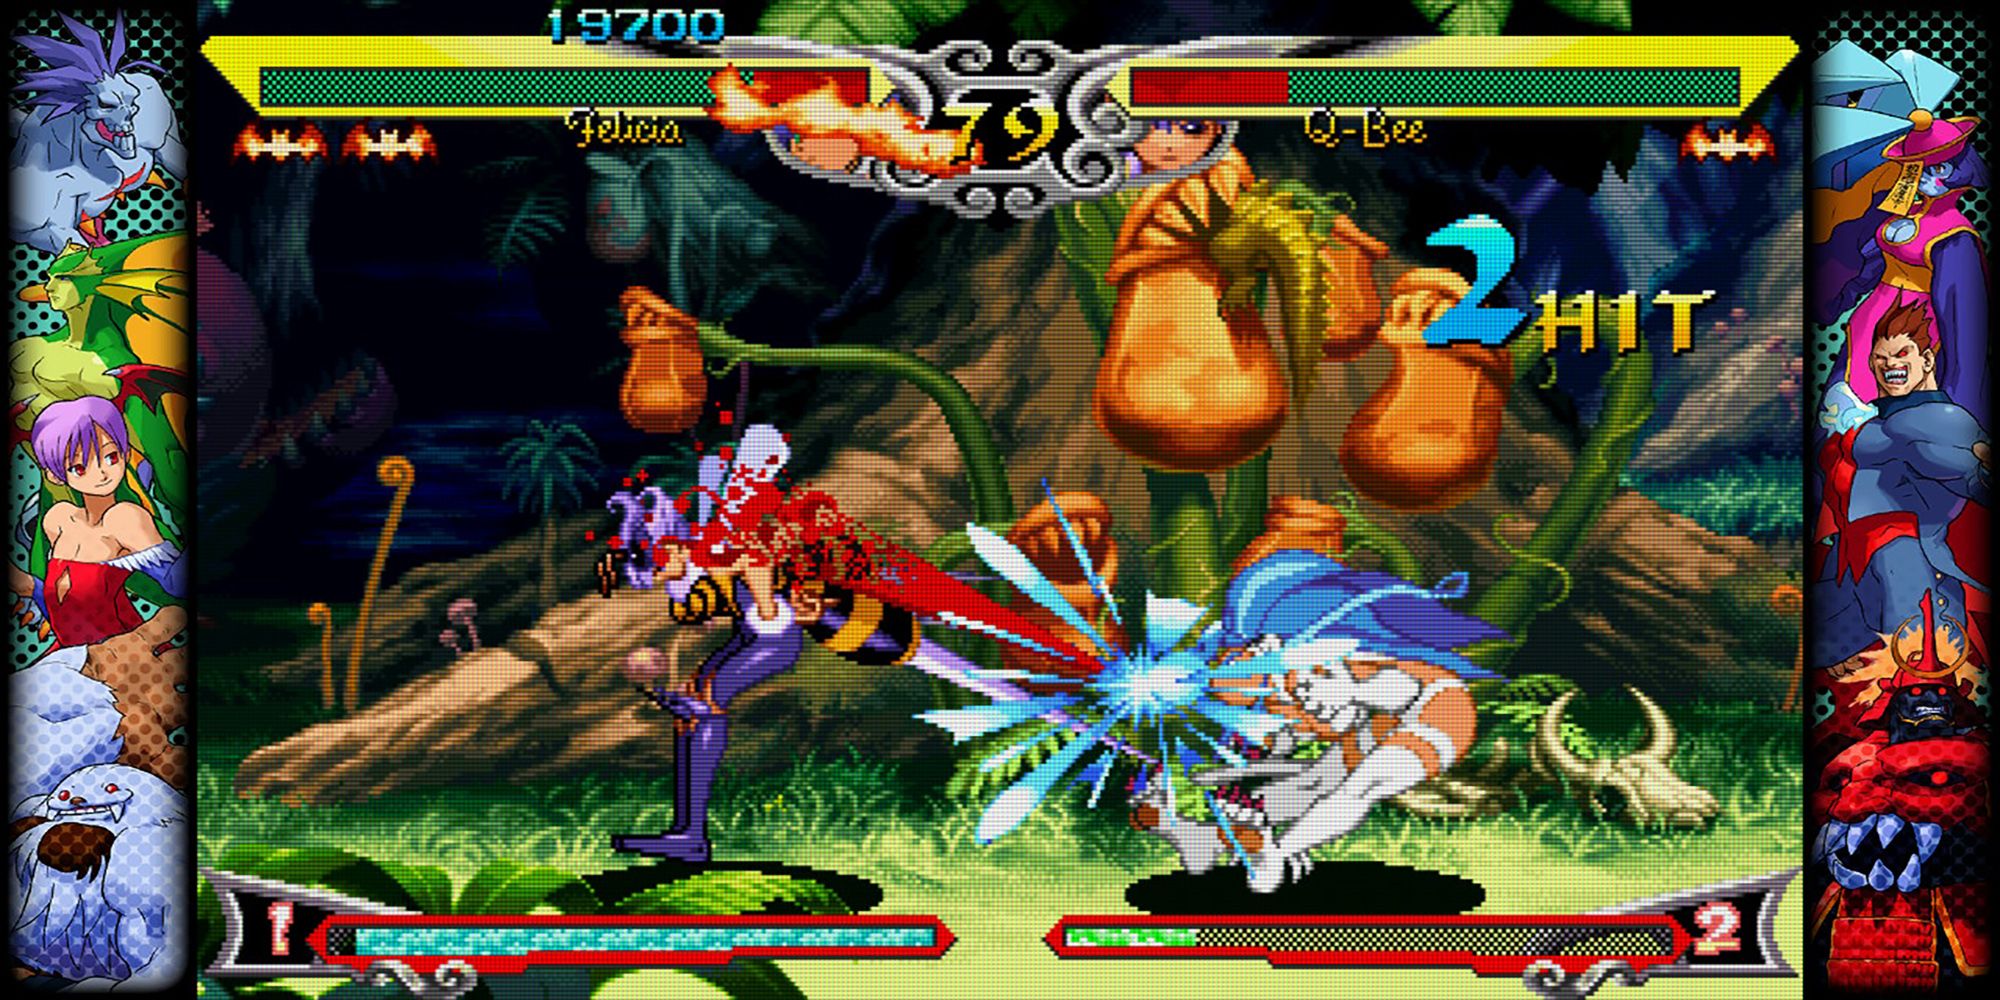 Q-Bee Stings Felicia during a swamp fight in Brazil in Vampire Savior, a game in Capcom Fighting Collection.